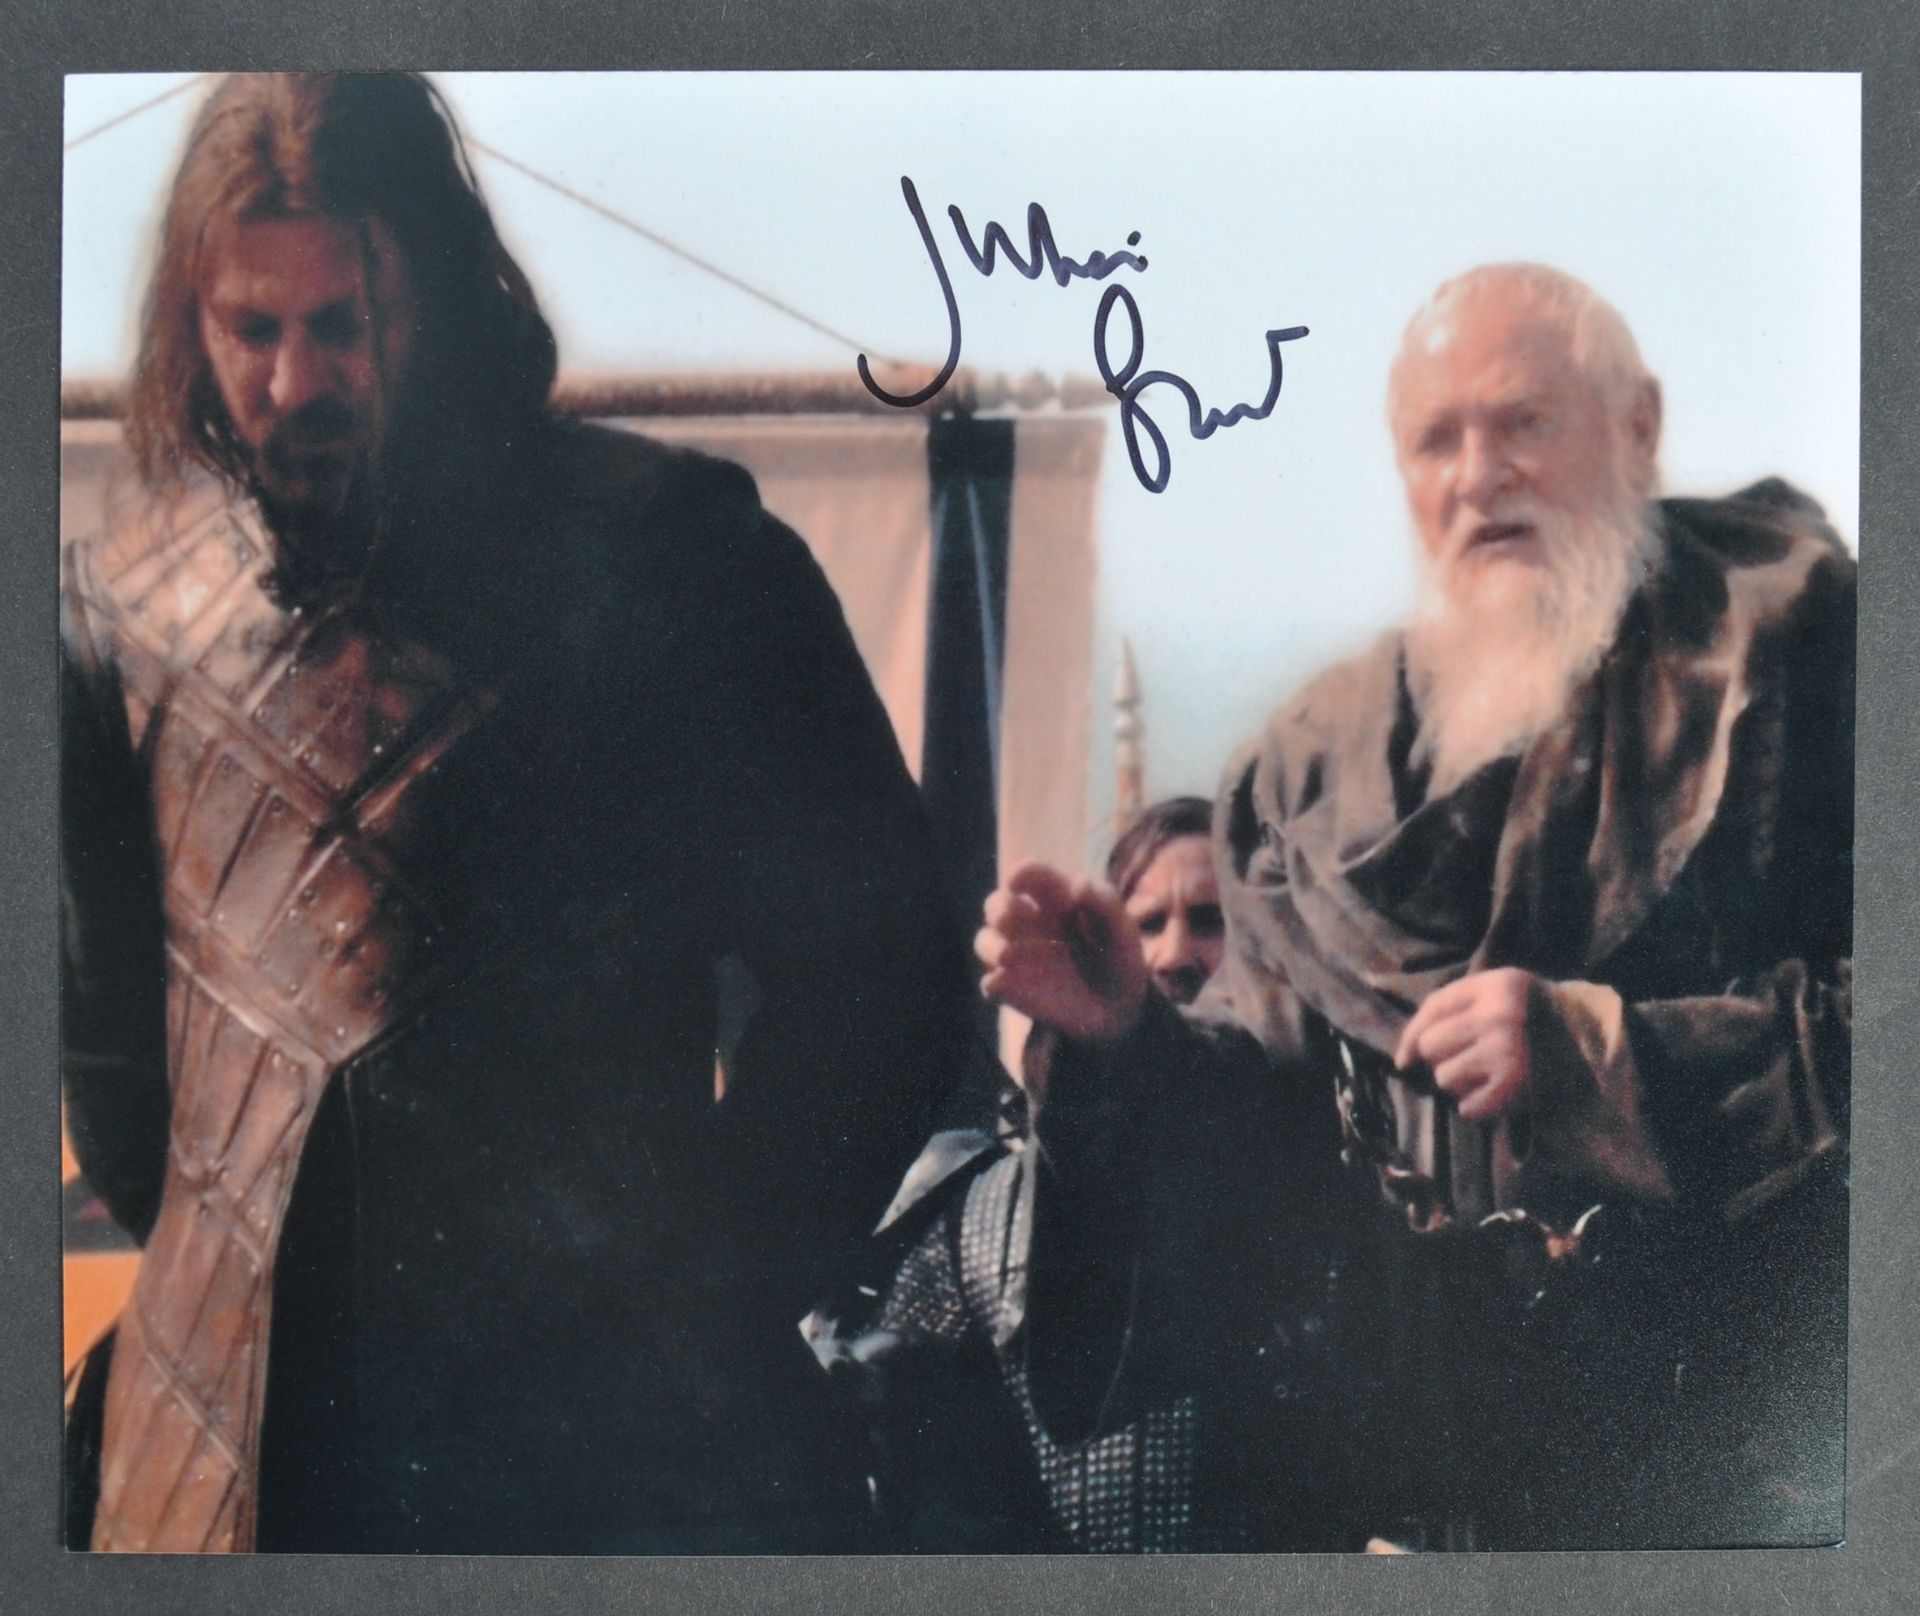 GAME OF THRONES - JULIAN GLOVER SIGNED PHOTOGRAPH